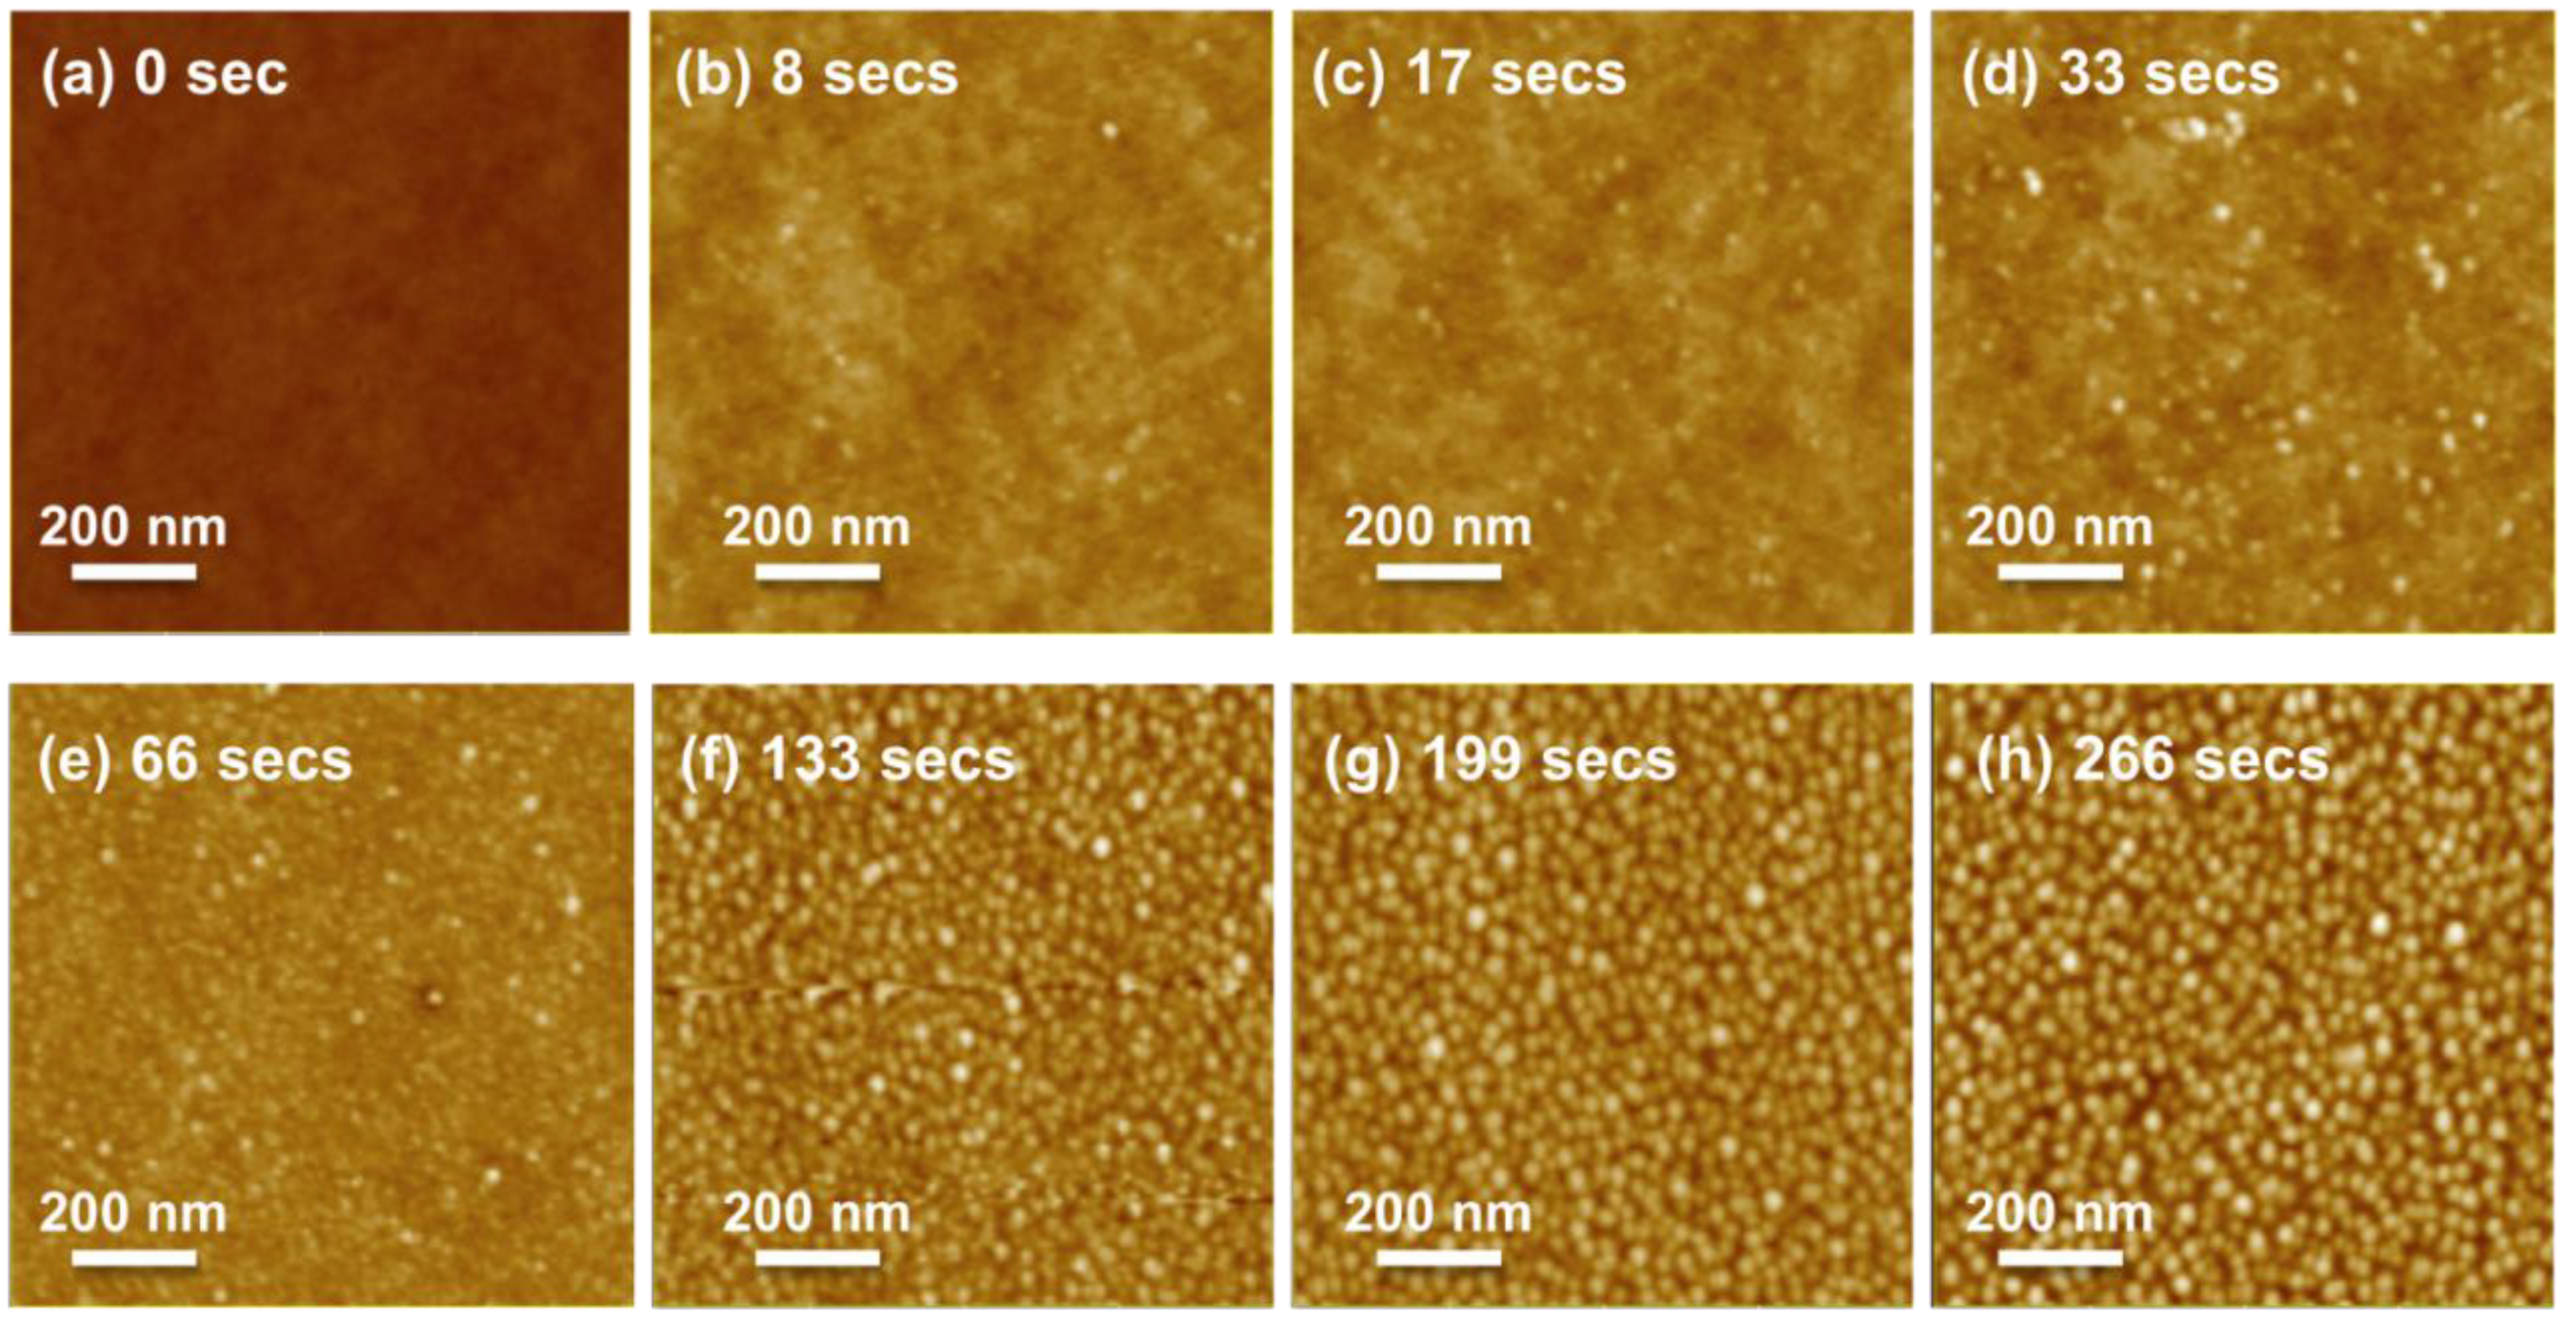 Area-Selective Etching of Poly(methyl methacrylate) Films by